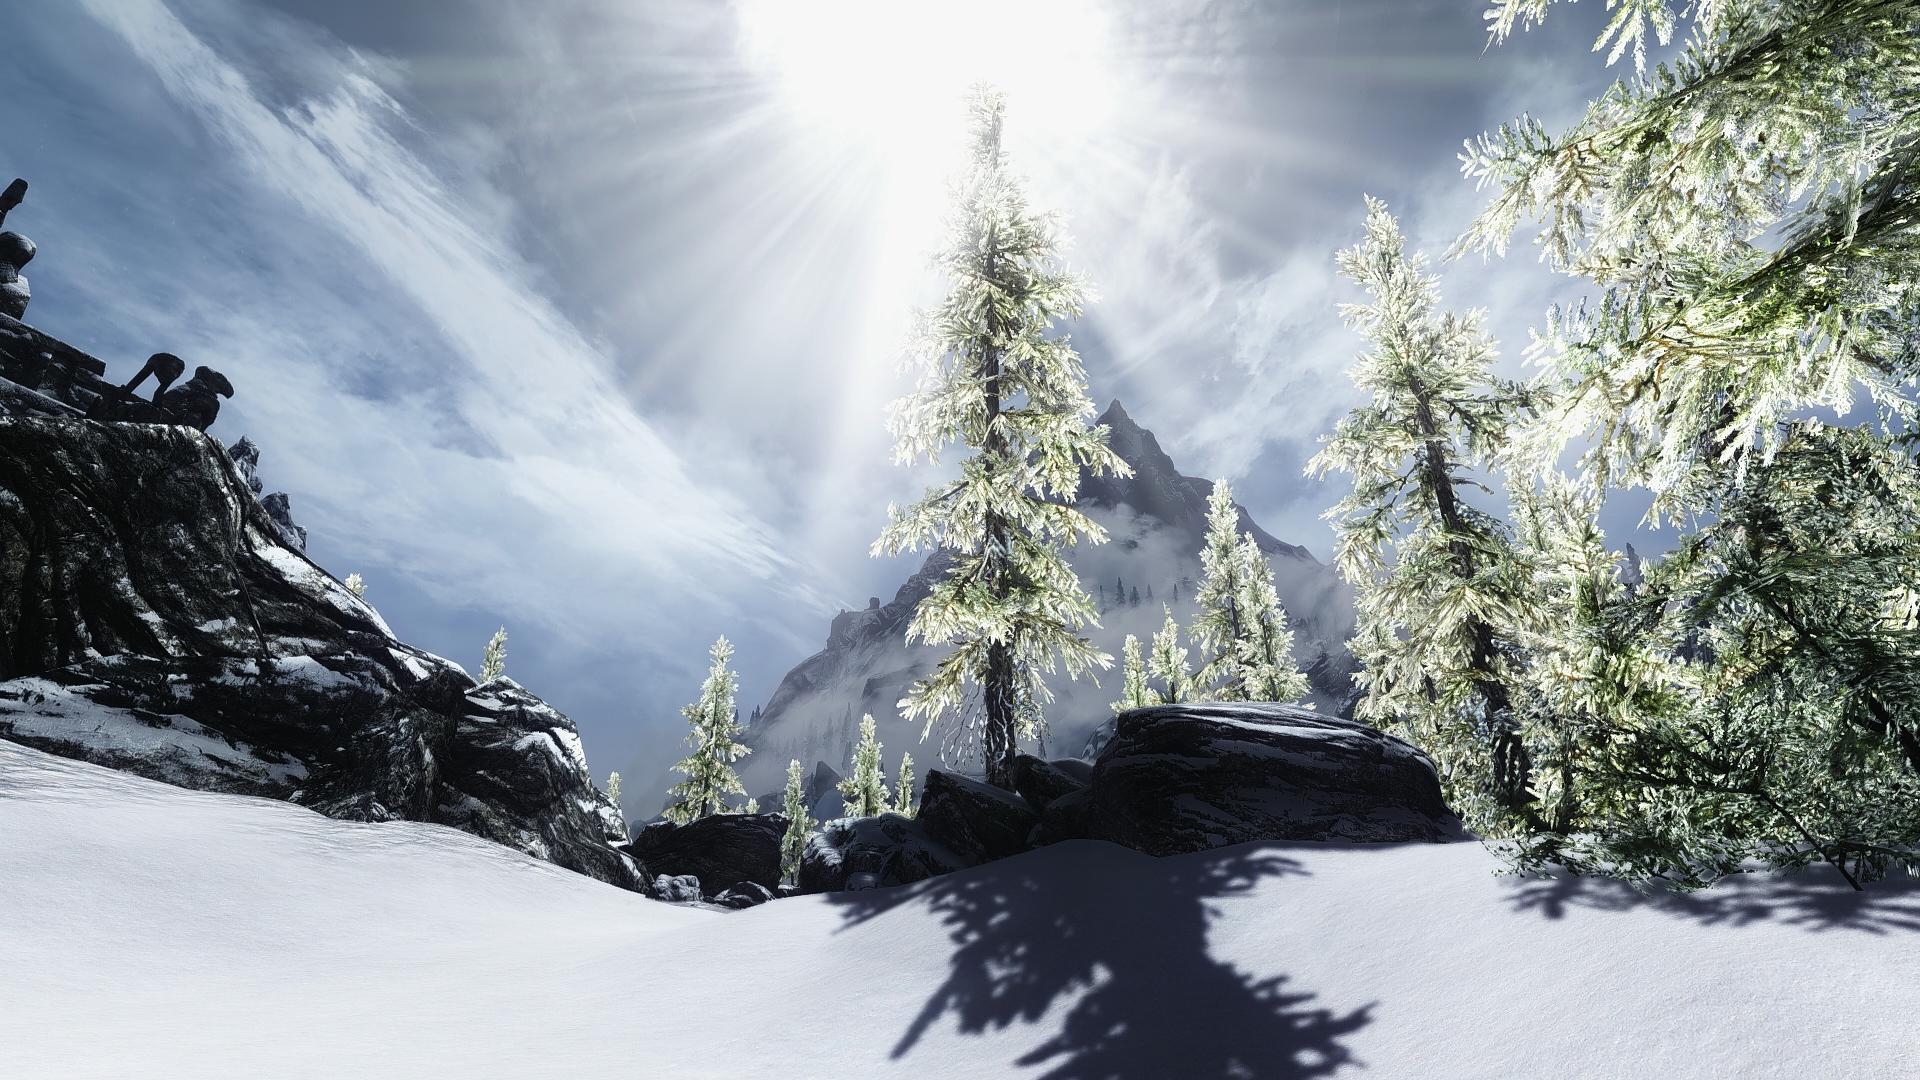 Skyrim Just Keeps Getting Prettier, Thanks to Modders